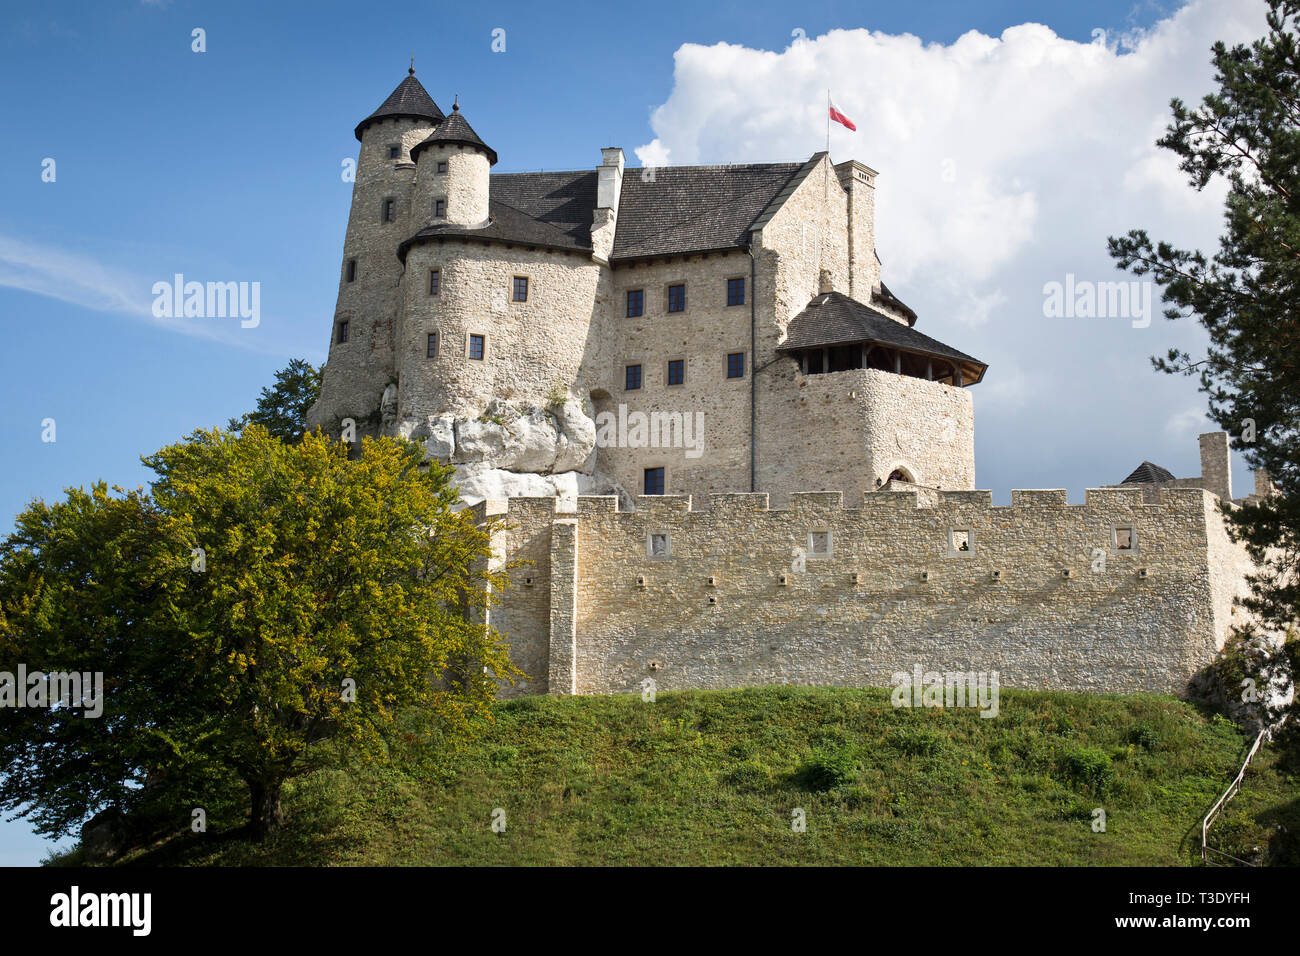 A contemporary reconstruction of the medieval castle in Bobolice. Poland. Stock Photo